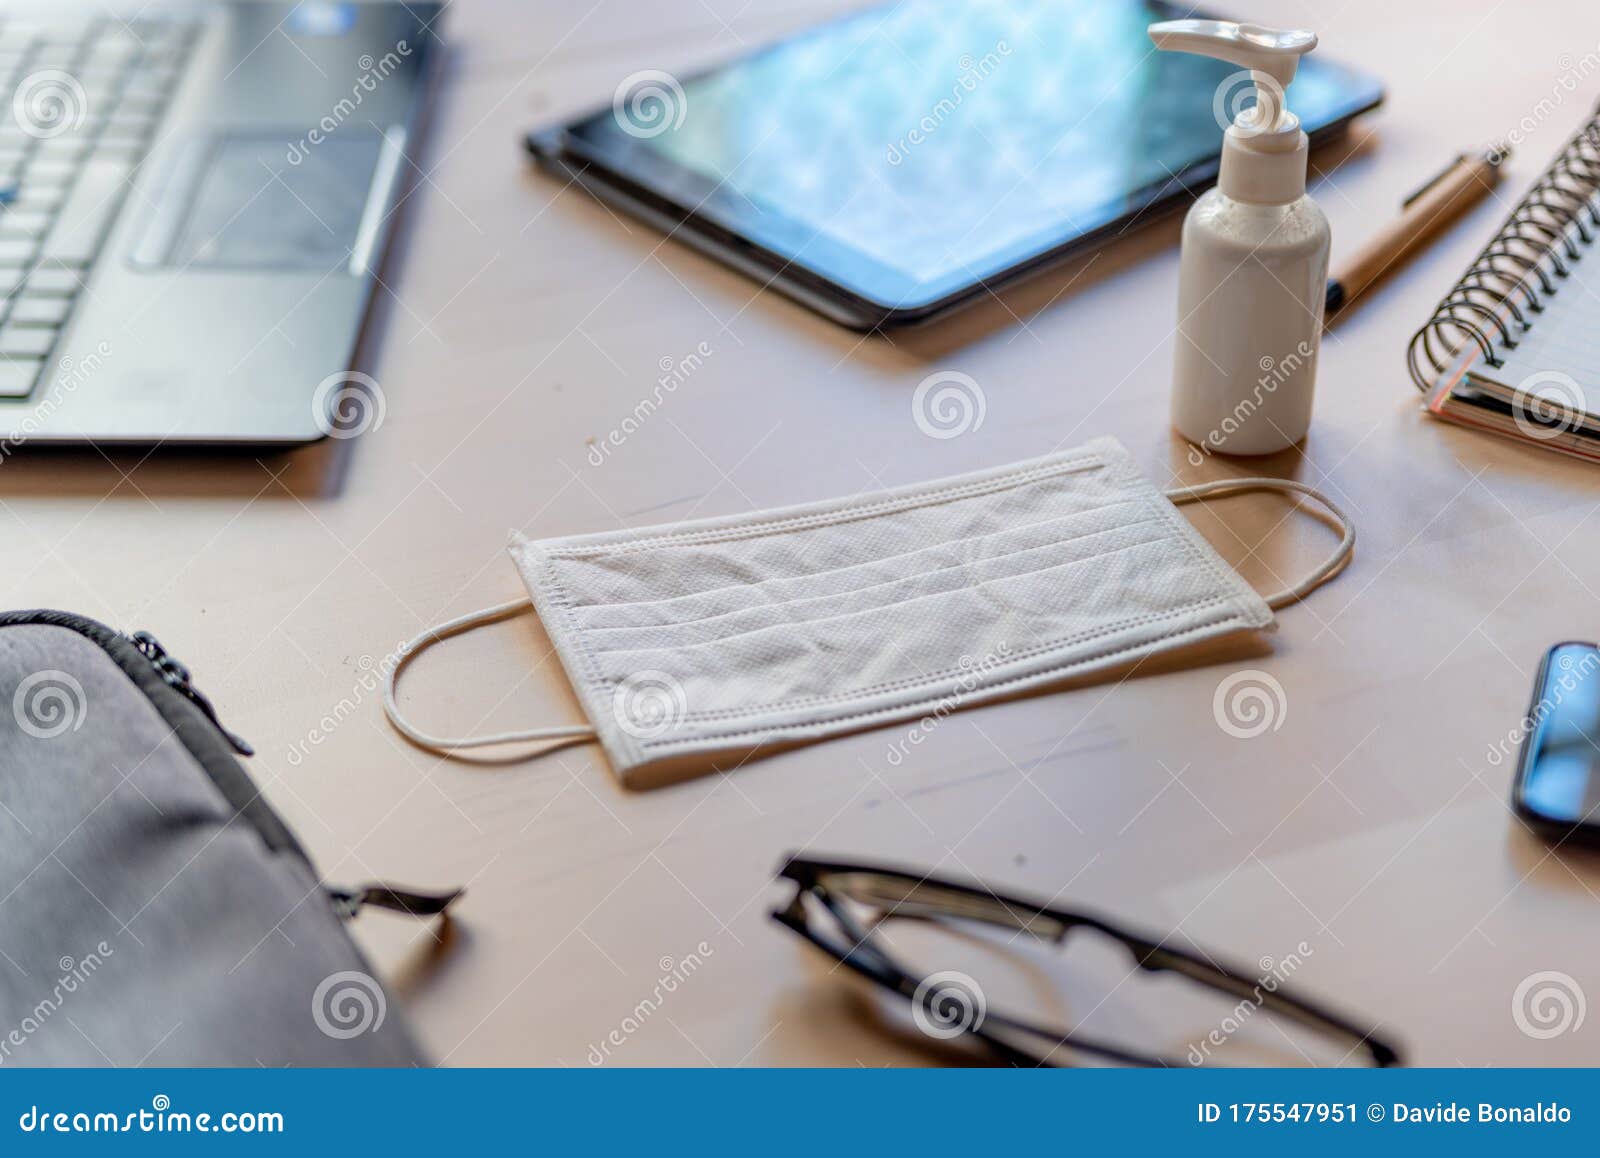 remote work kit on wooden office desk with hand sanitizer and face mask, a solution against the spread of corona virus for